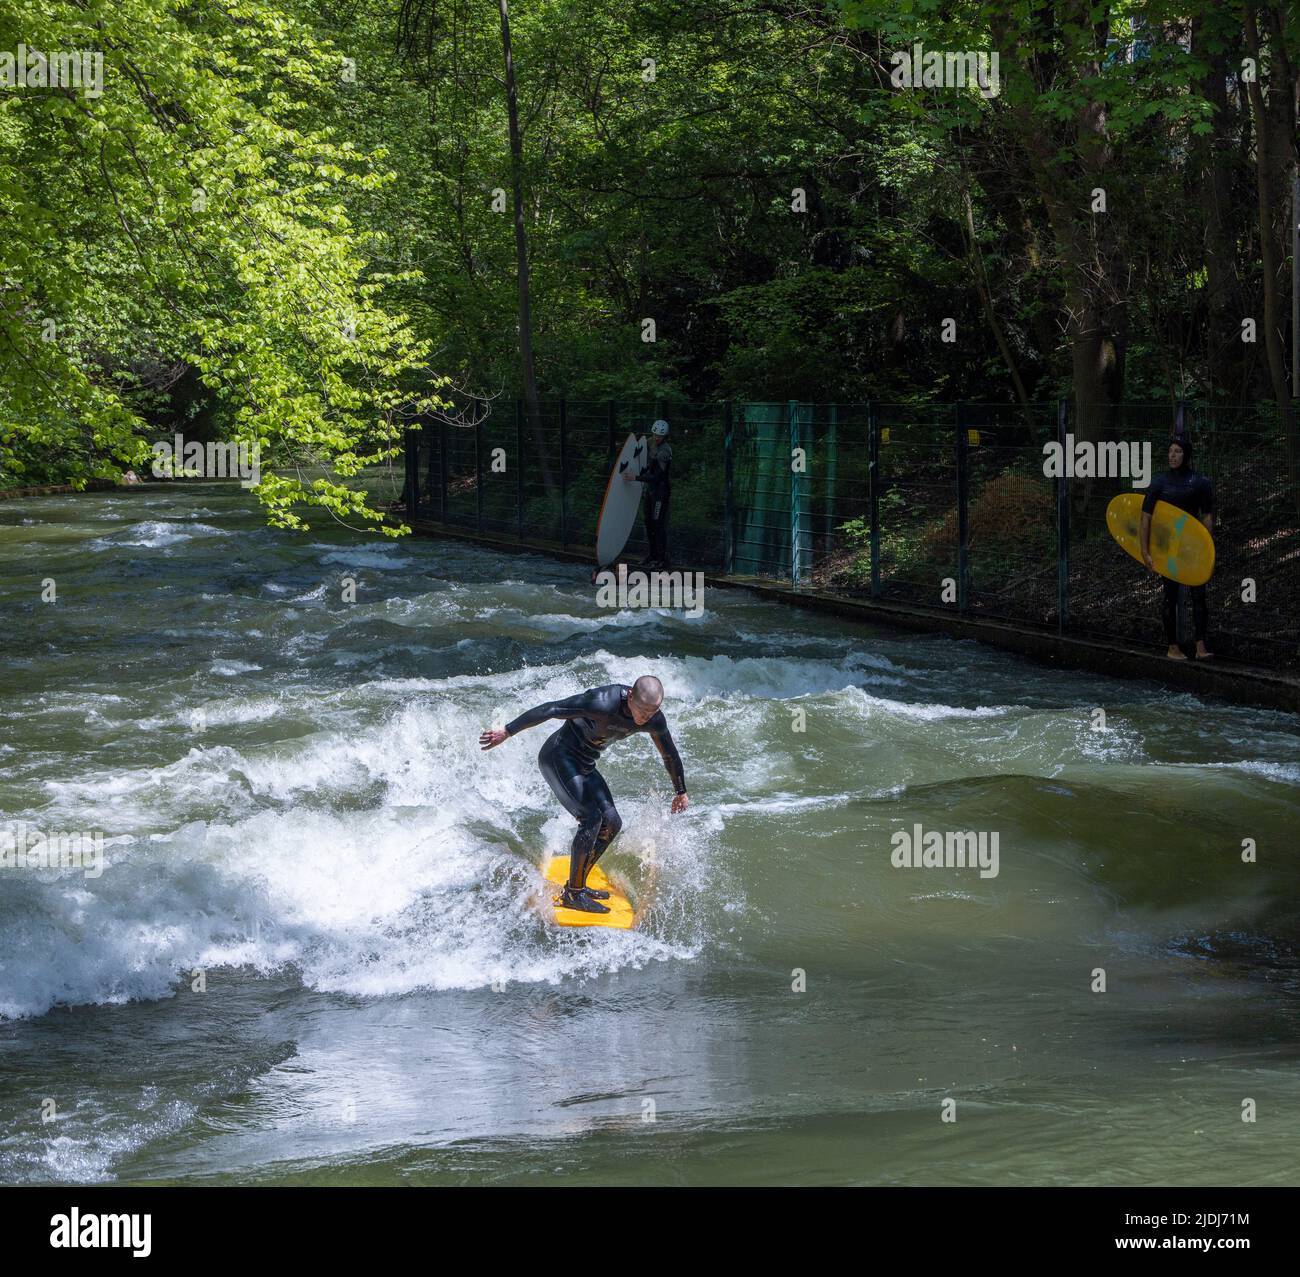 Surfer on the Eisbach river, English Garden city park, Munich, Germany Stock Photo